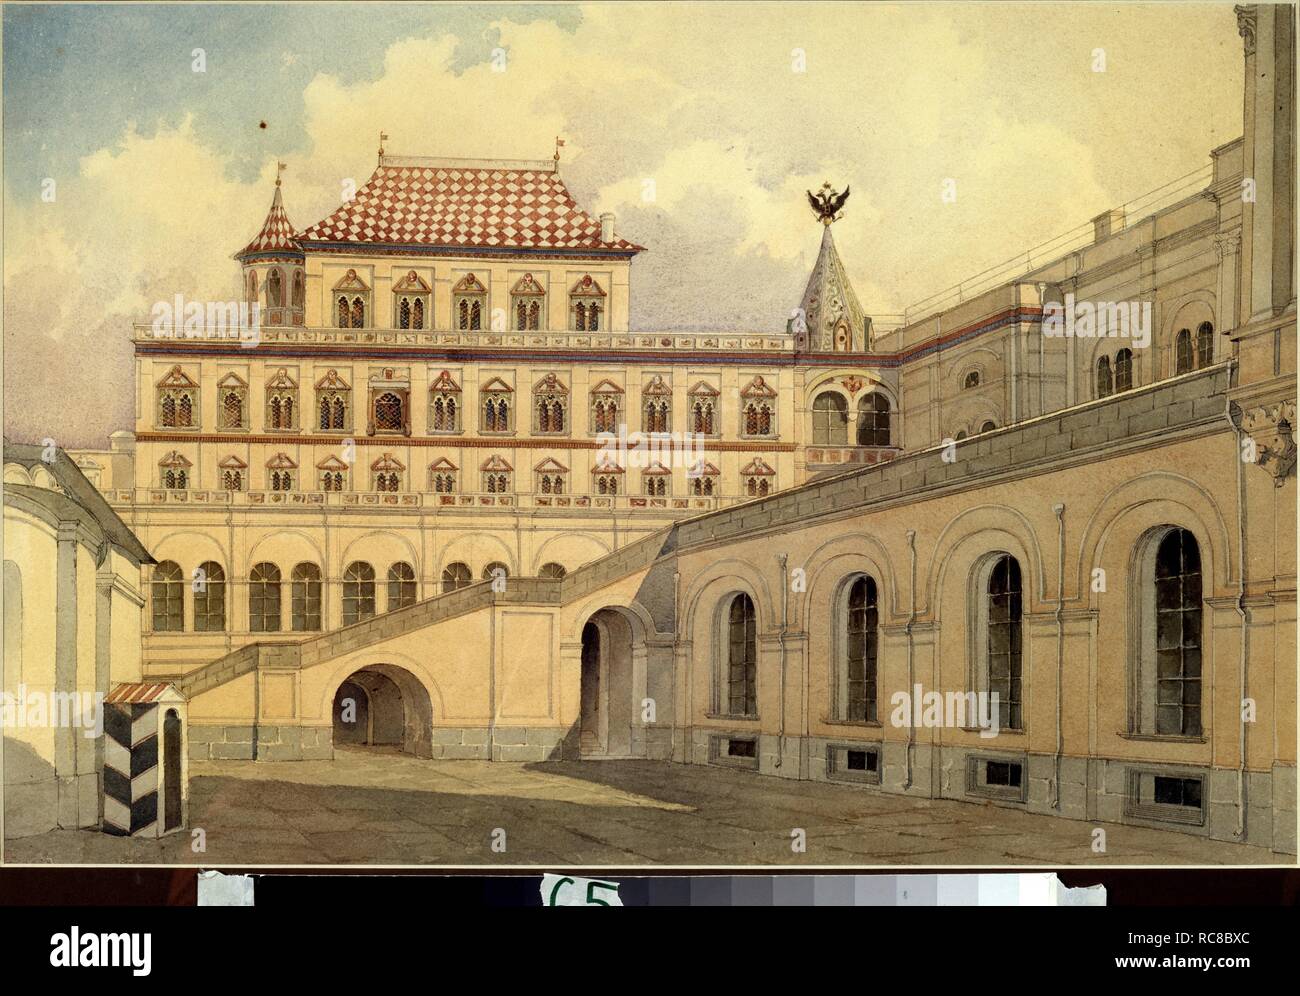 The Terem Palace in Moscow Kremlin. Museum: State Tretyakov Gallery, Moscow. Author: Rabus, Karl Ivanovich. Stock Photo